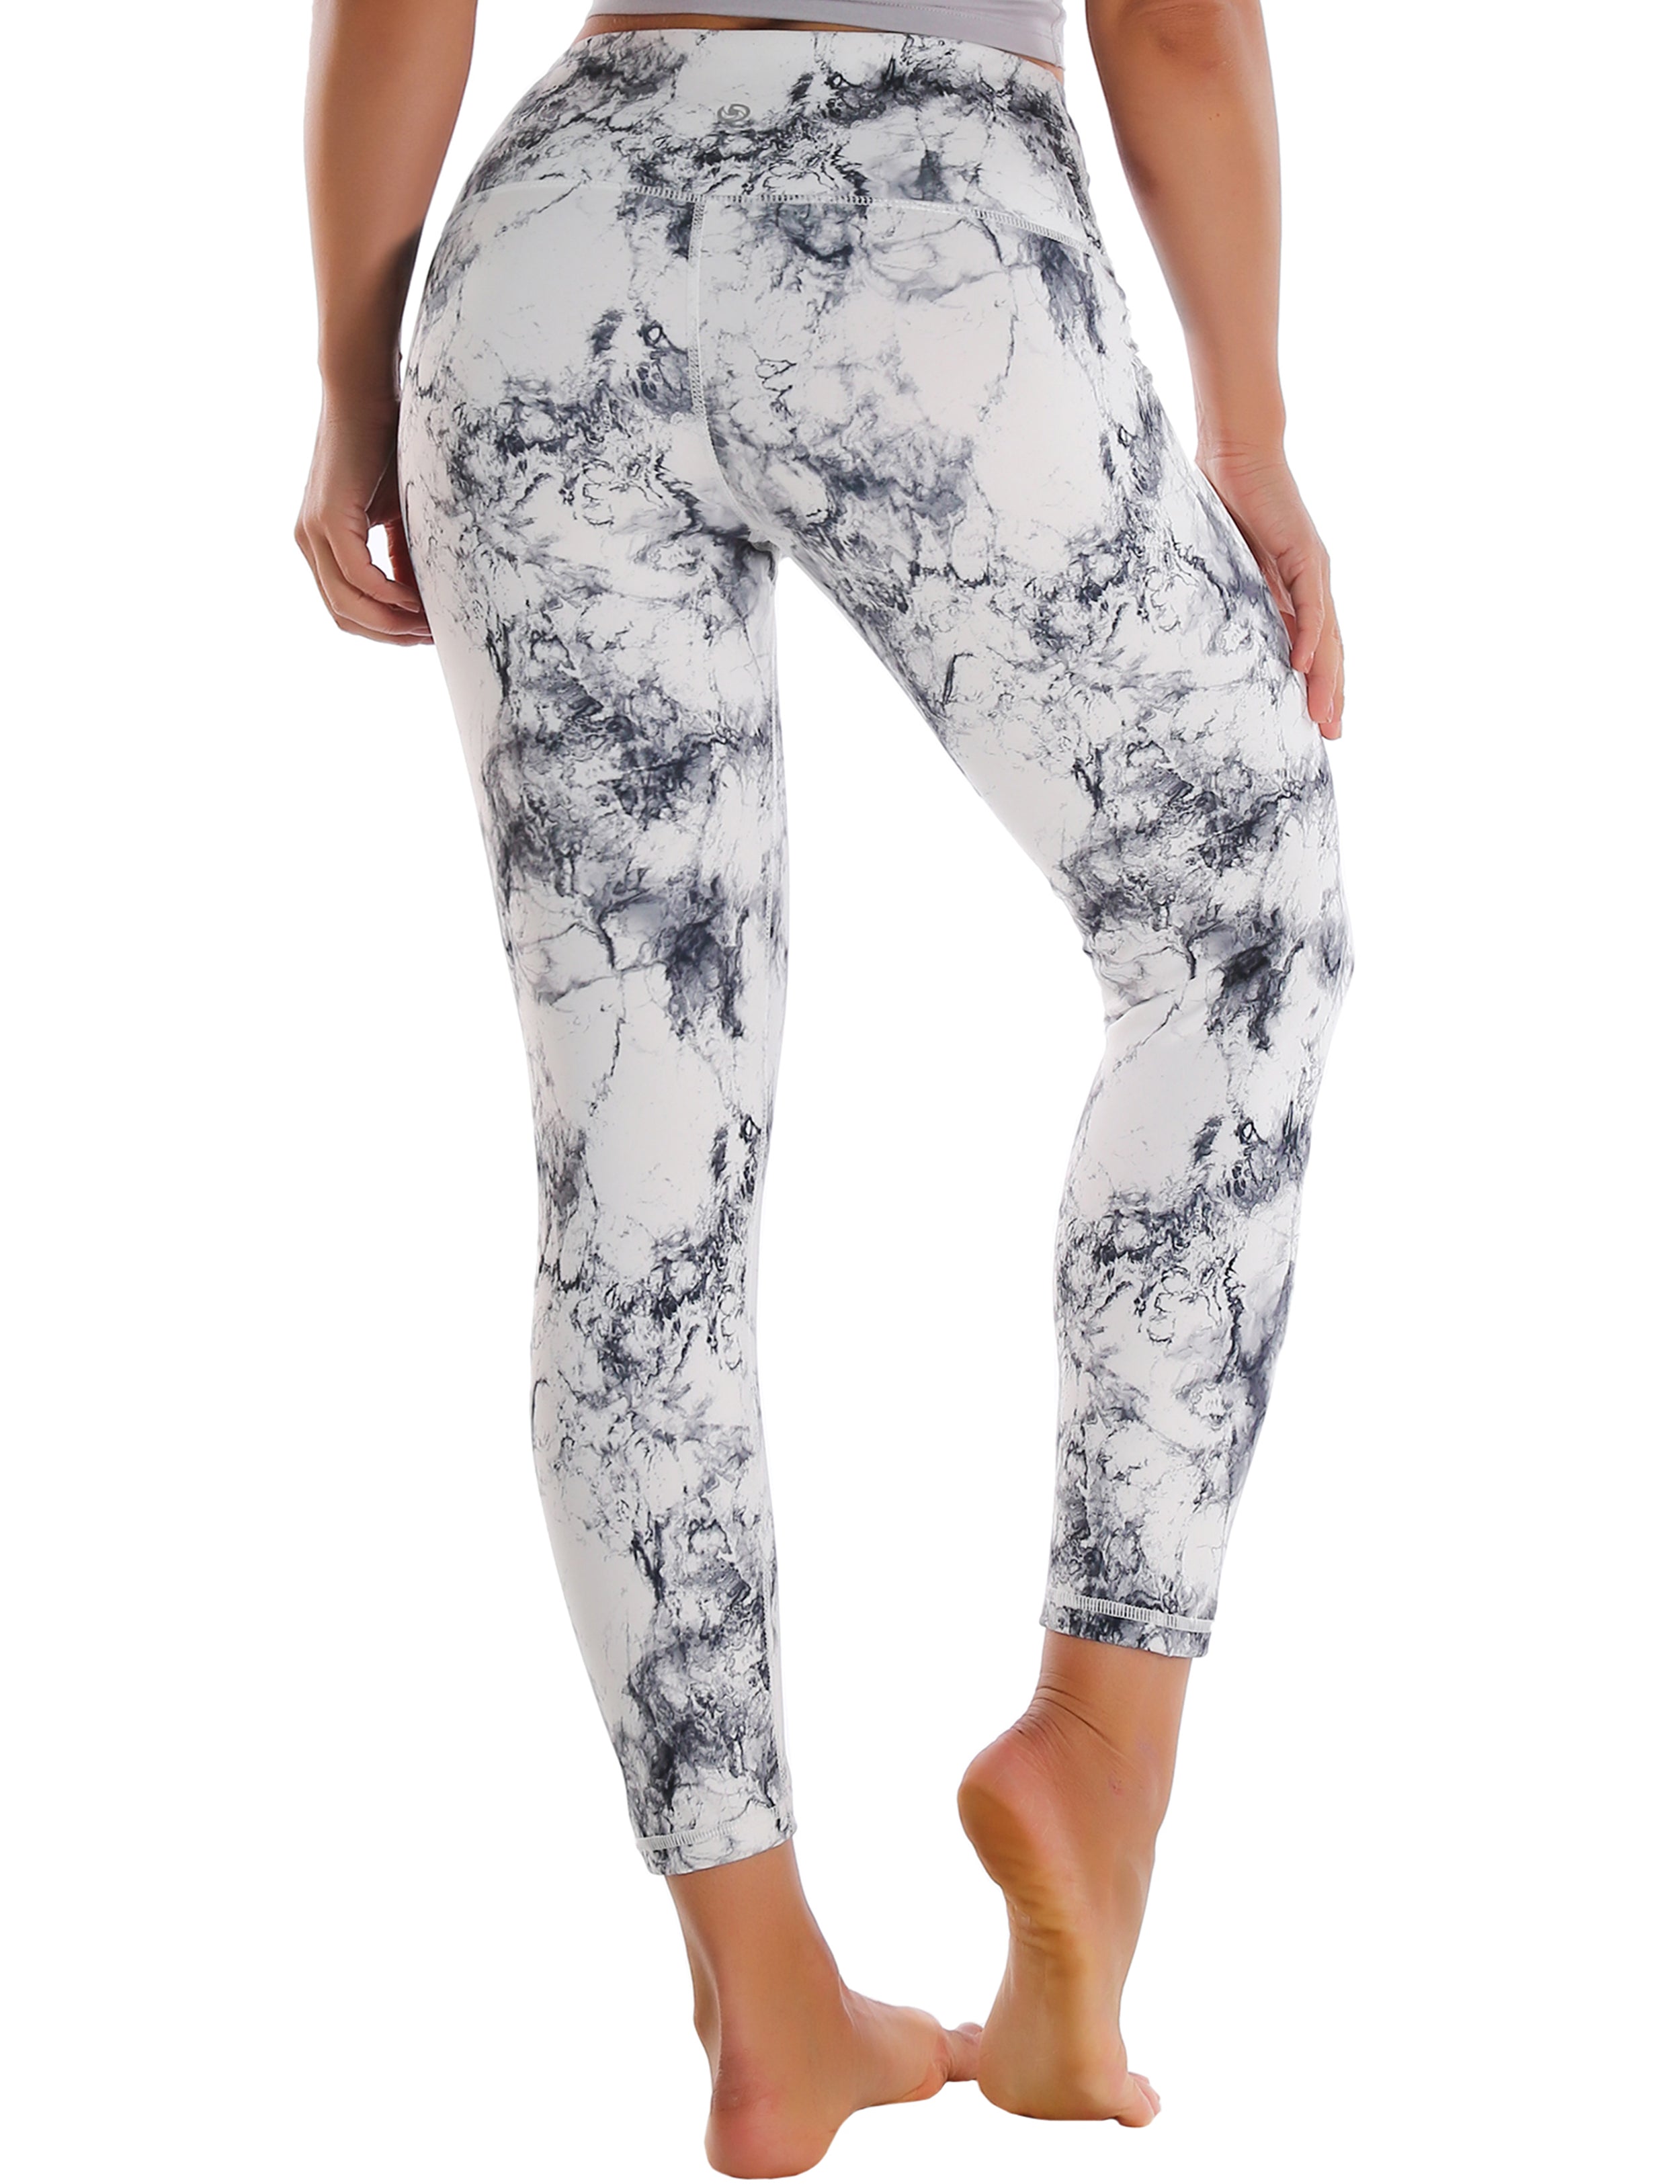 22" High Waist Crop Tight Capris arabescato 82%Polyester/18%Spandex Fabric doesn't attract lint easily 4-way stretch No see-through Moisture-wicking Tummy control Inner pocket